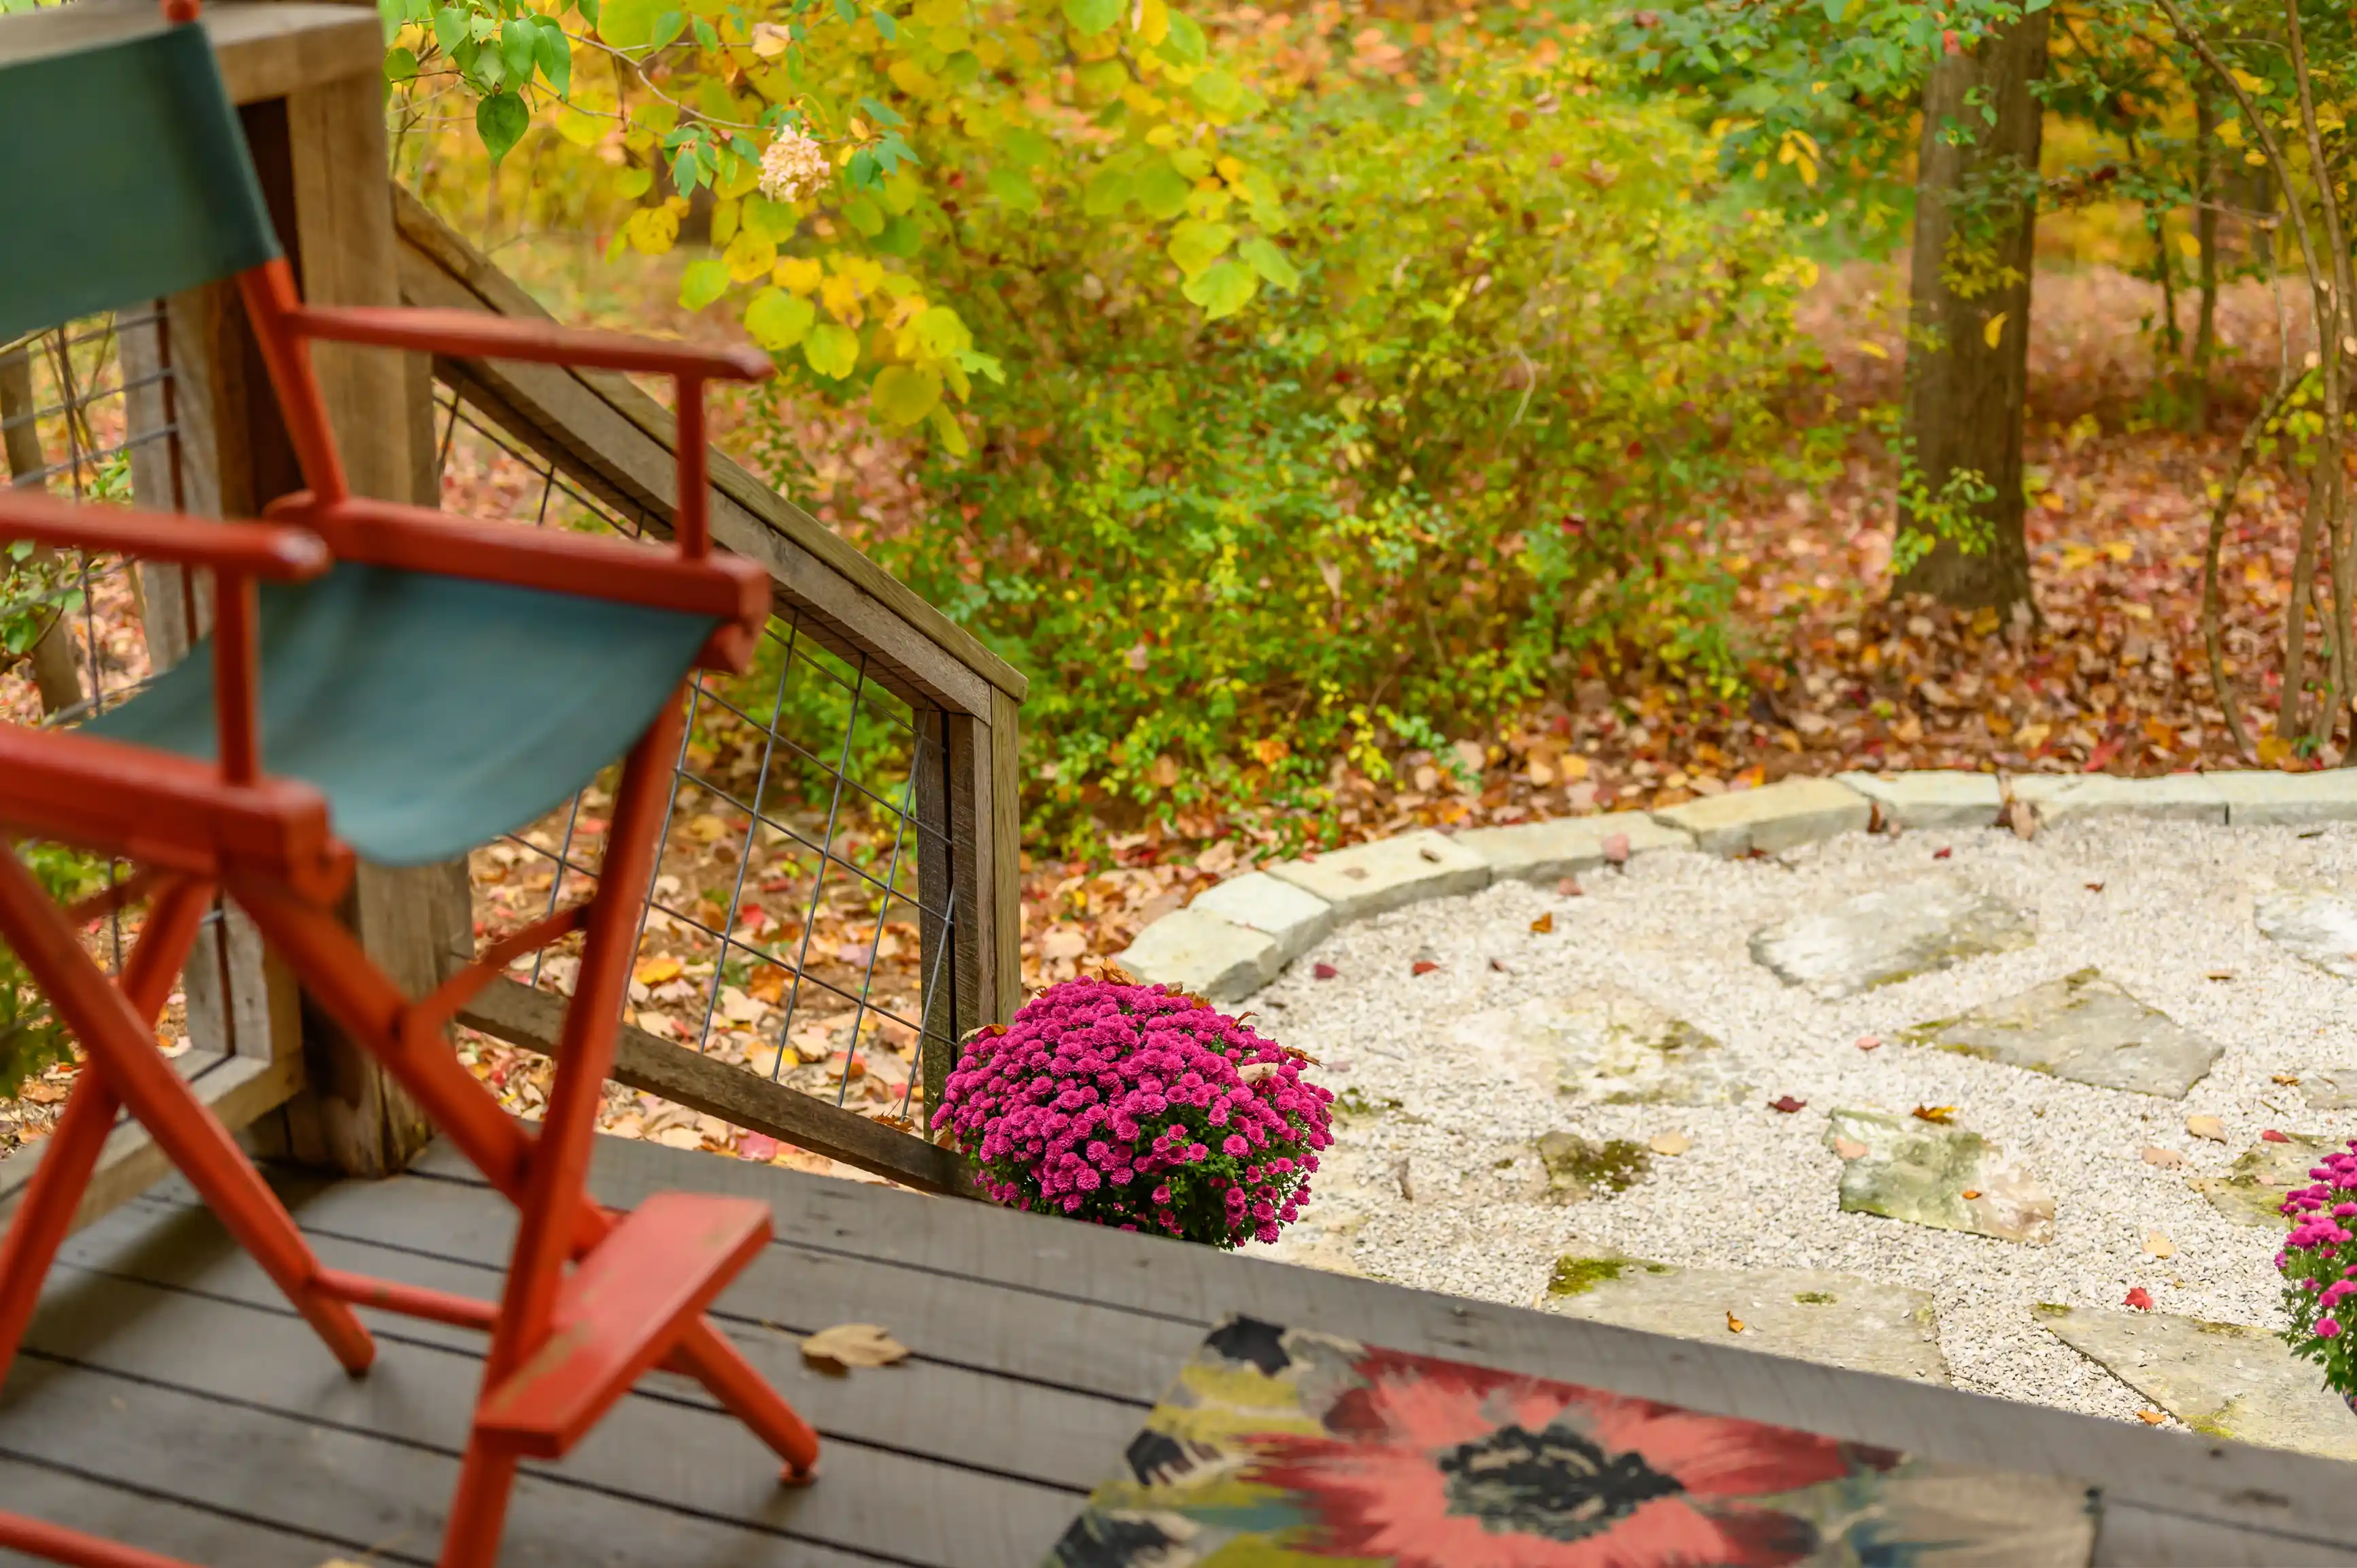 A cozy autumn porch with a red rocking chair overlooking a garden with blooming purple chrysanthemums and a stone pathway amidst fallen leaves.